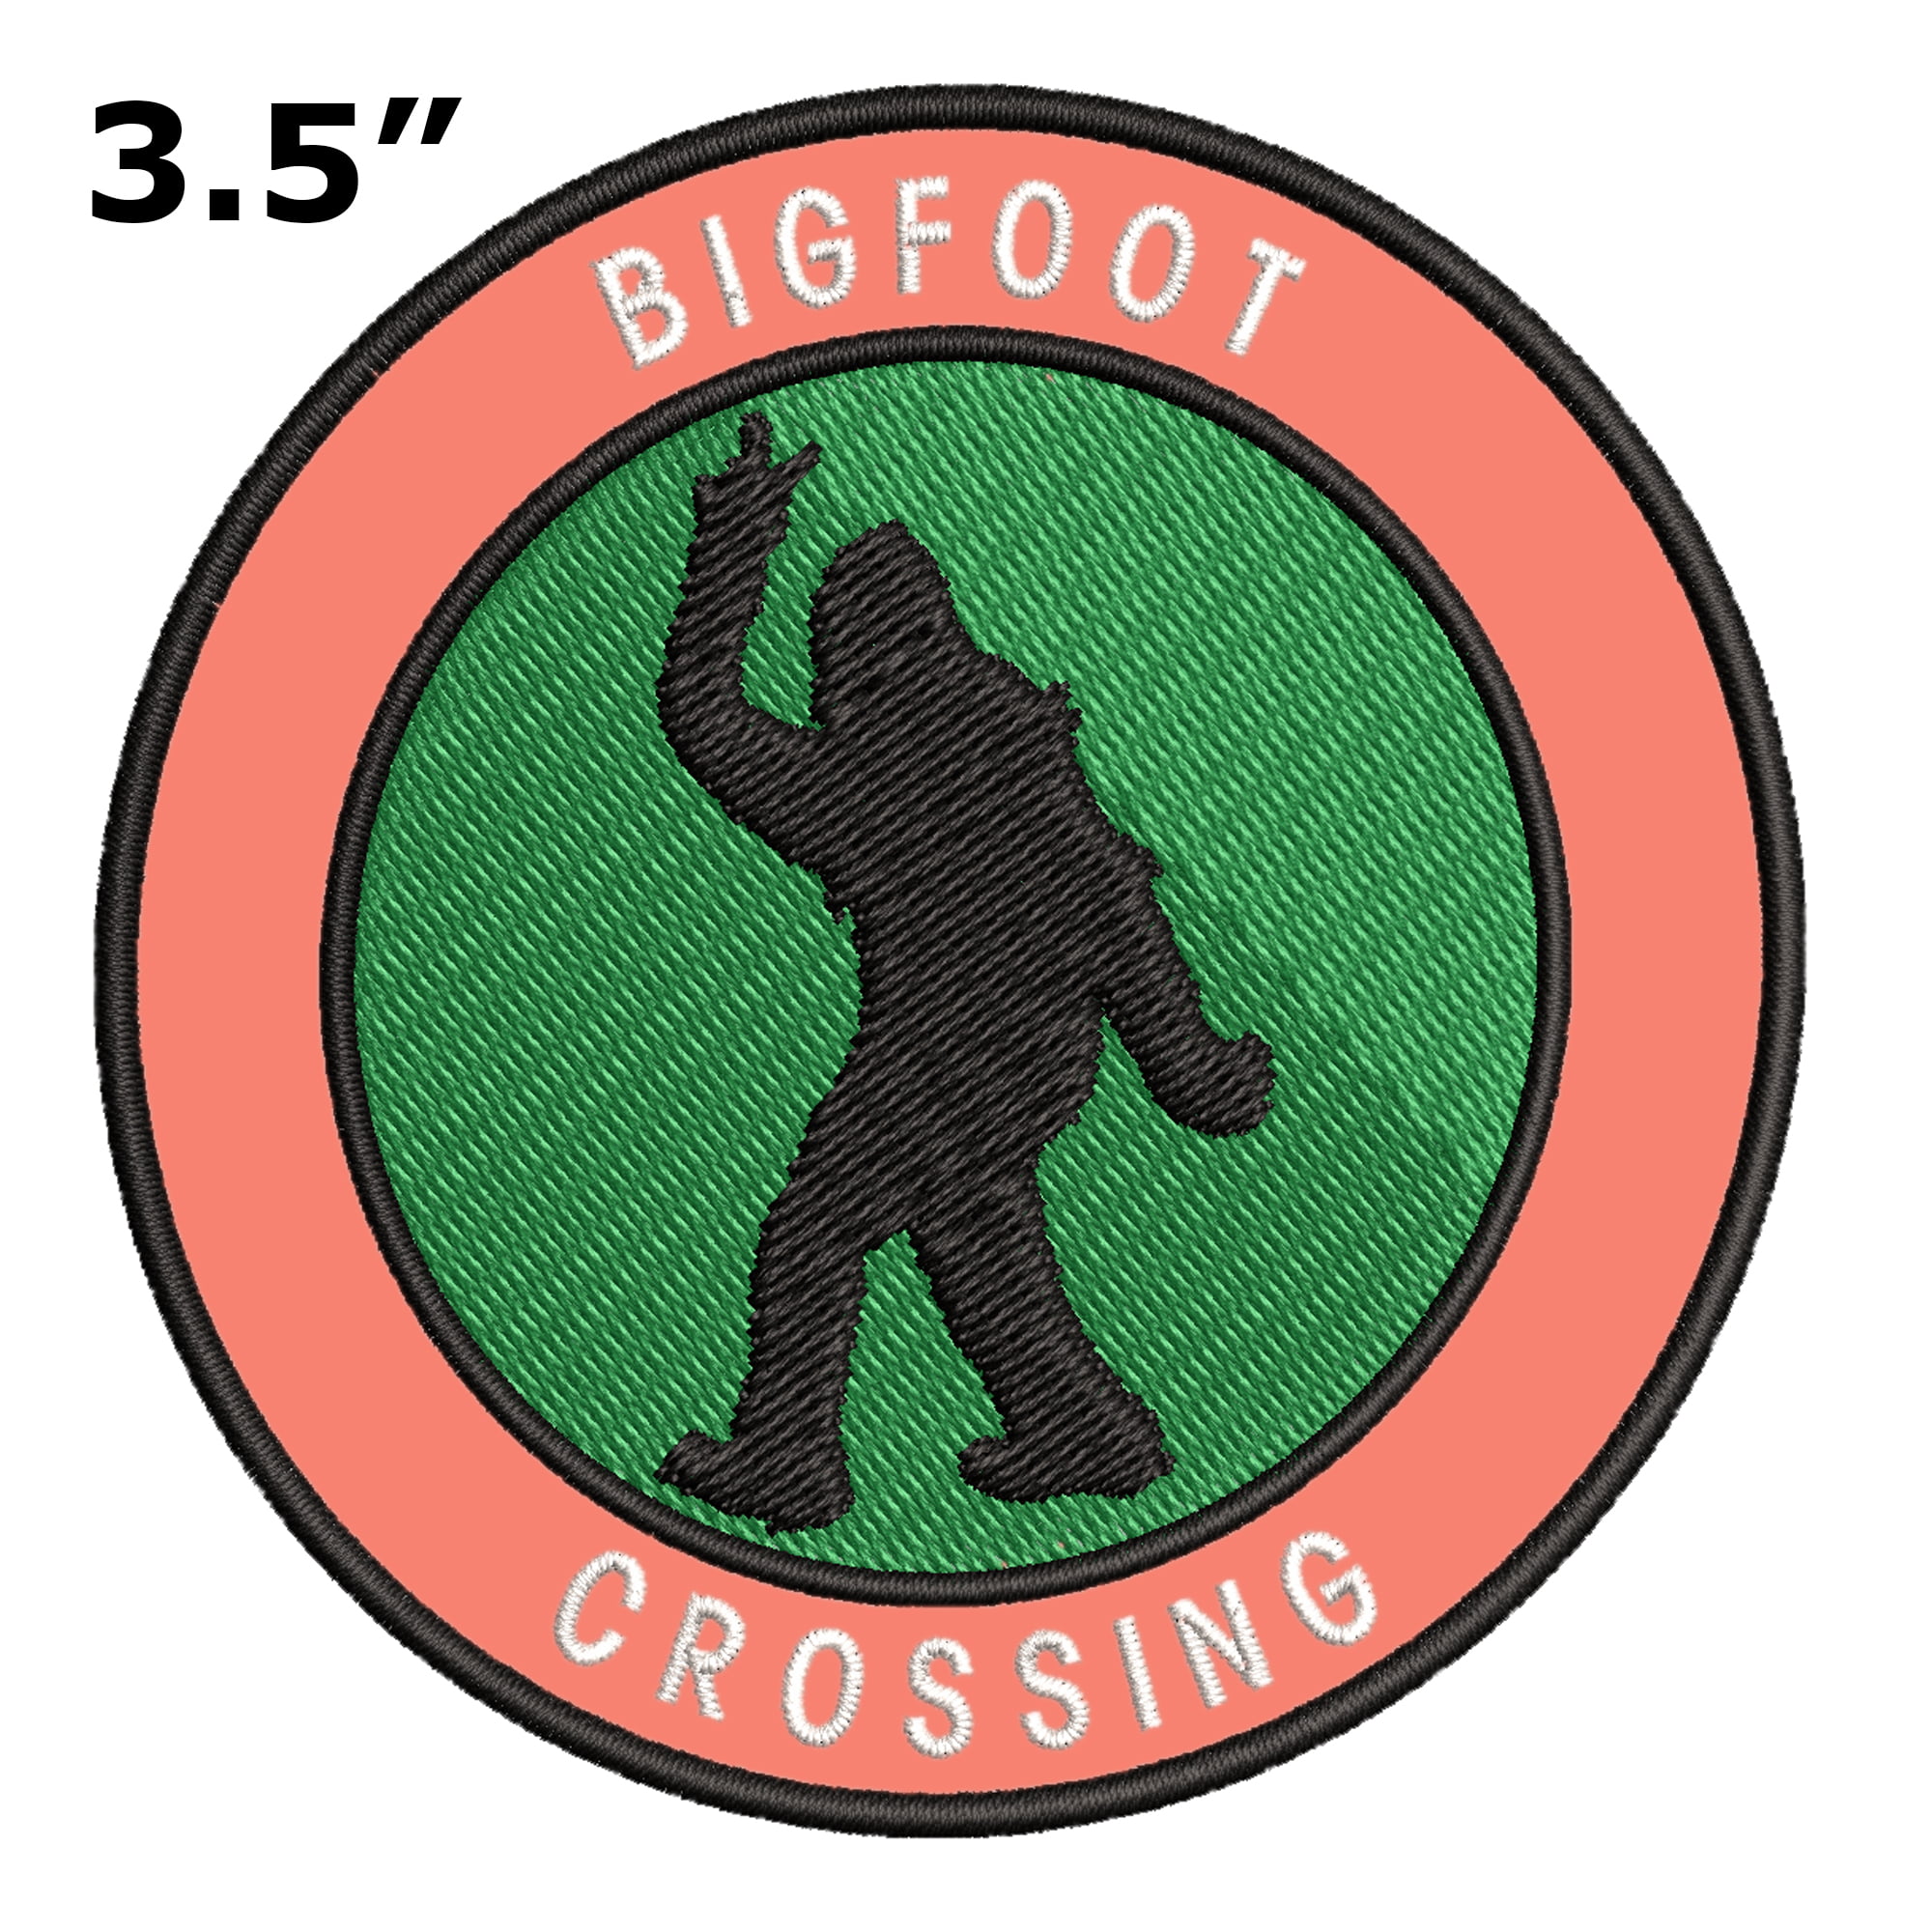 Bigfoot crossing embroidered patch iron on Big Foot crossing